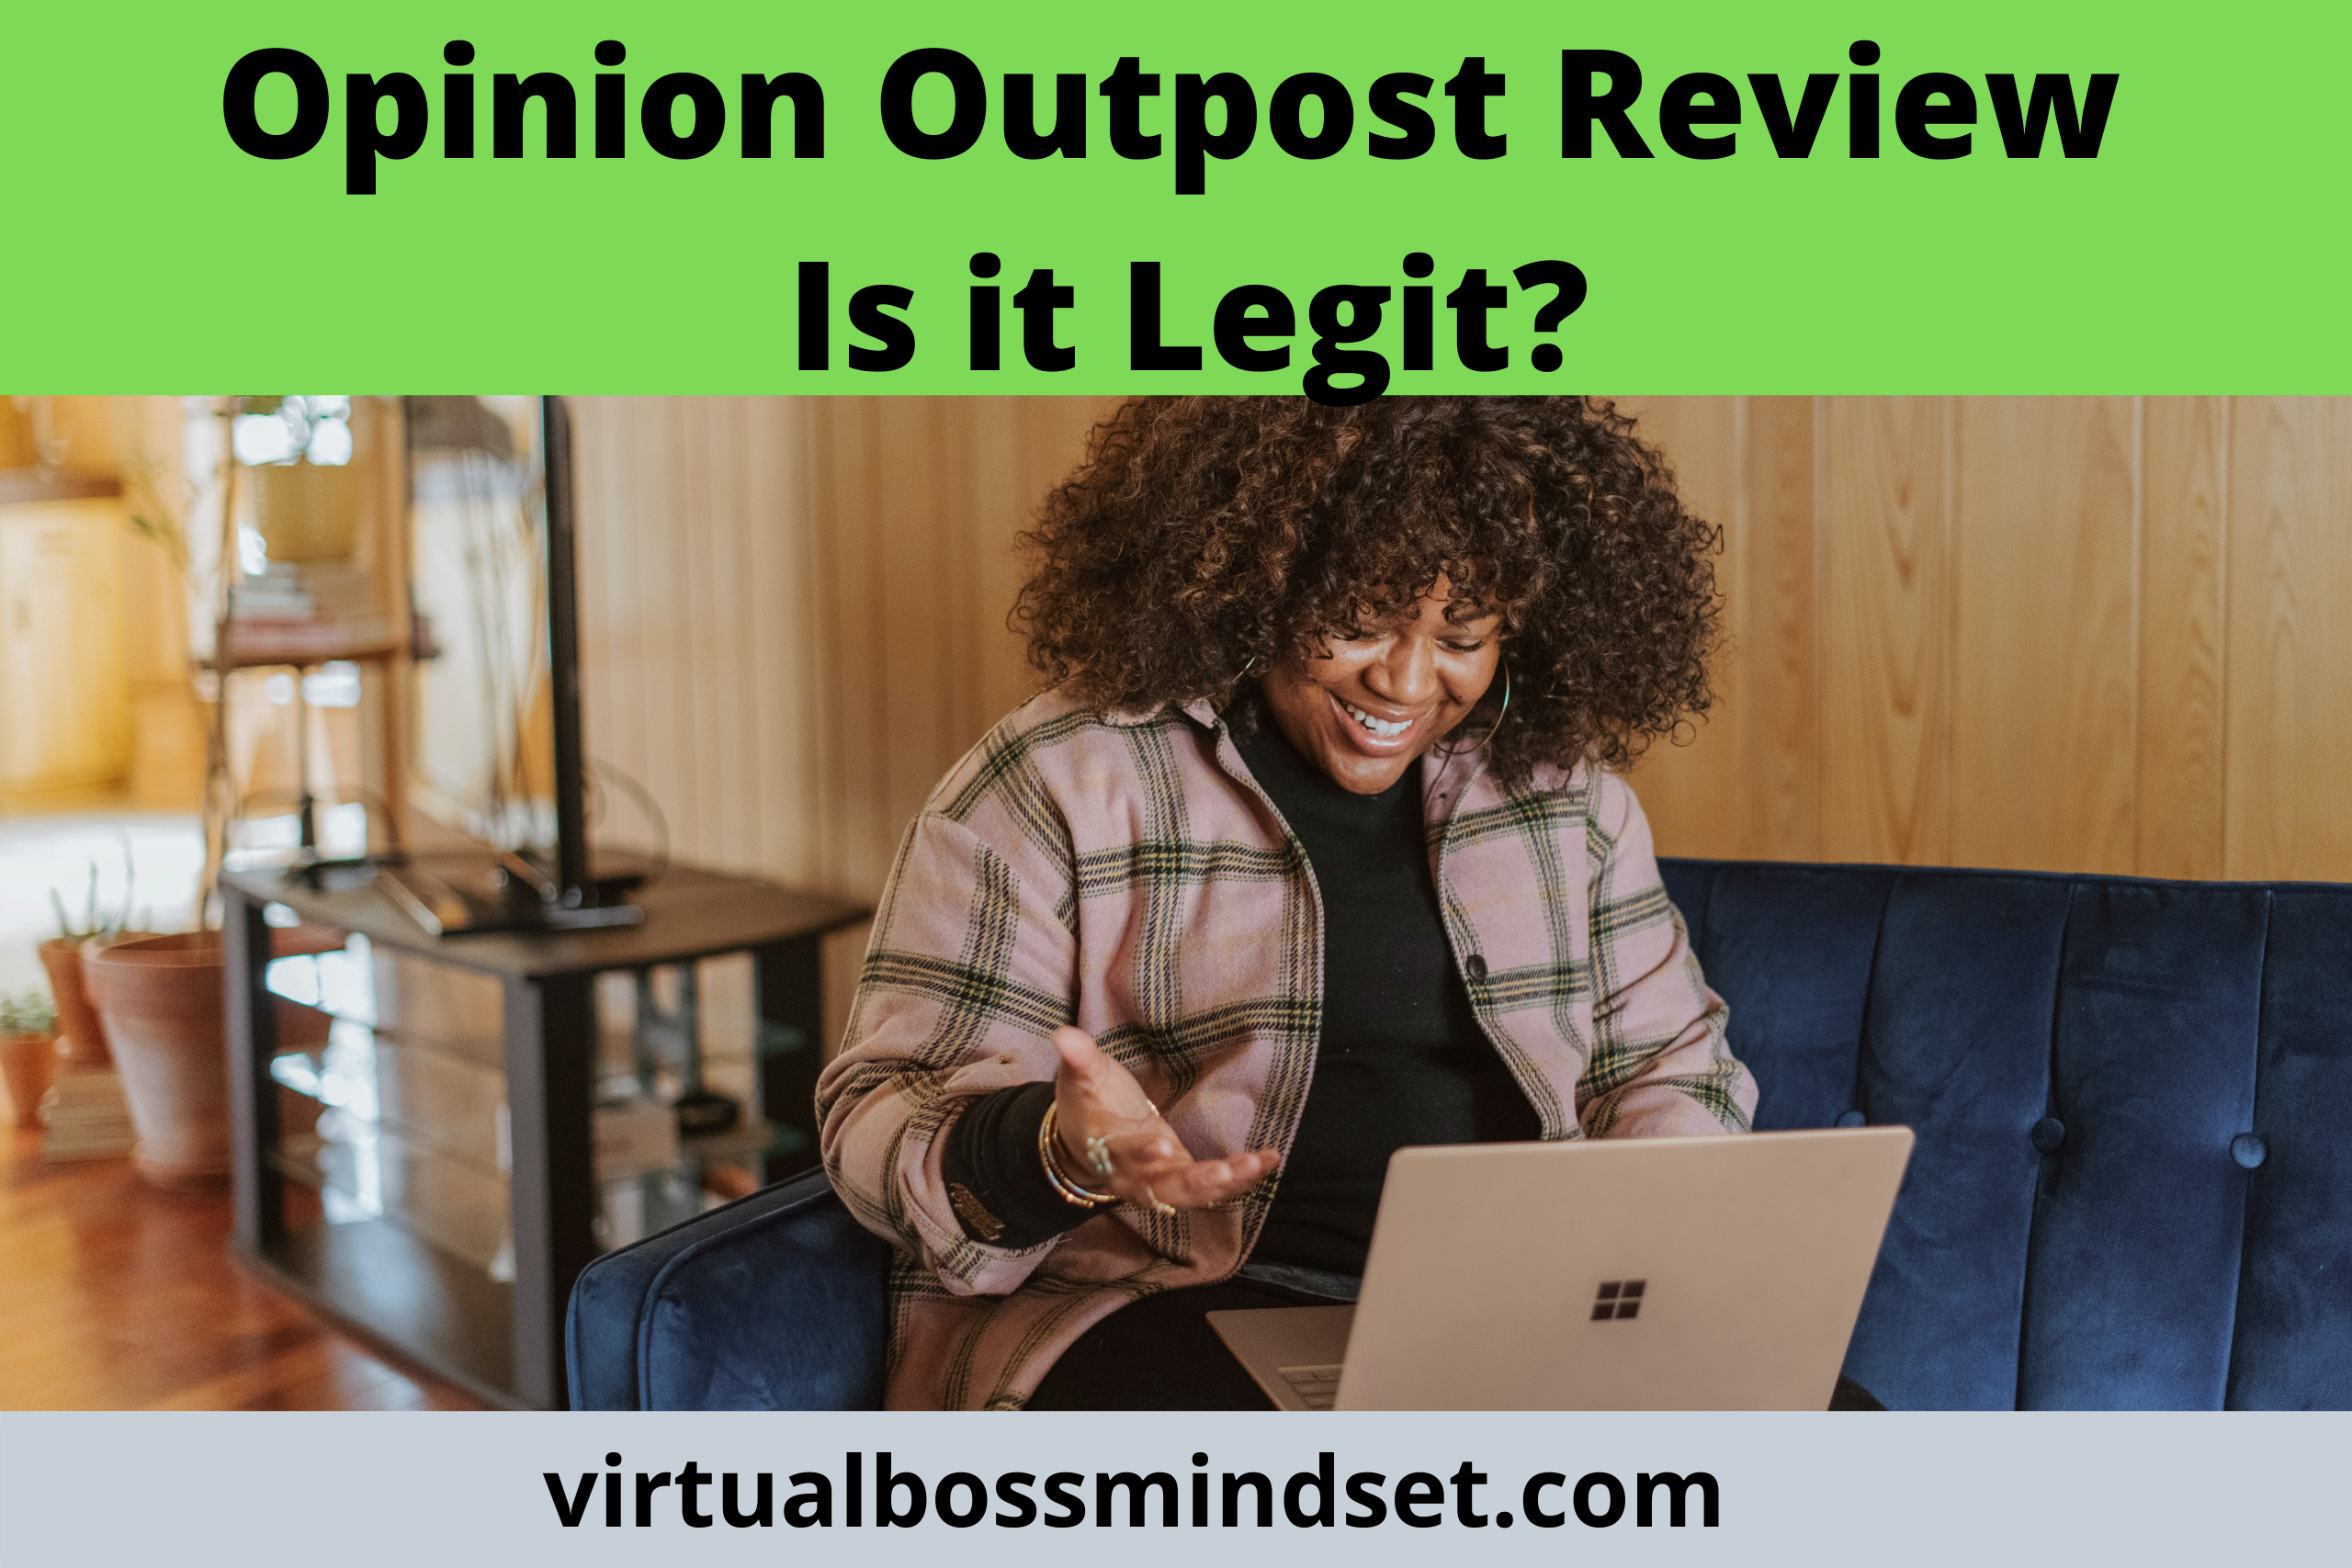 Opinion Outpost Review: Is it Legit?